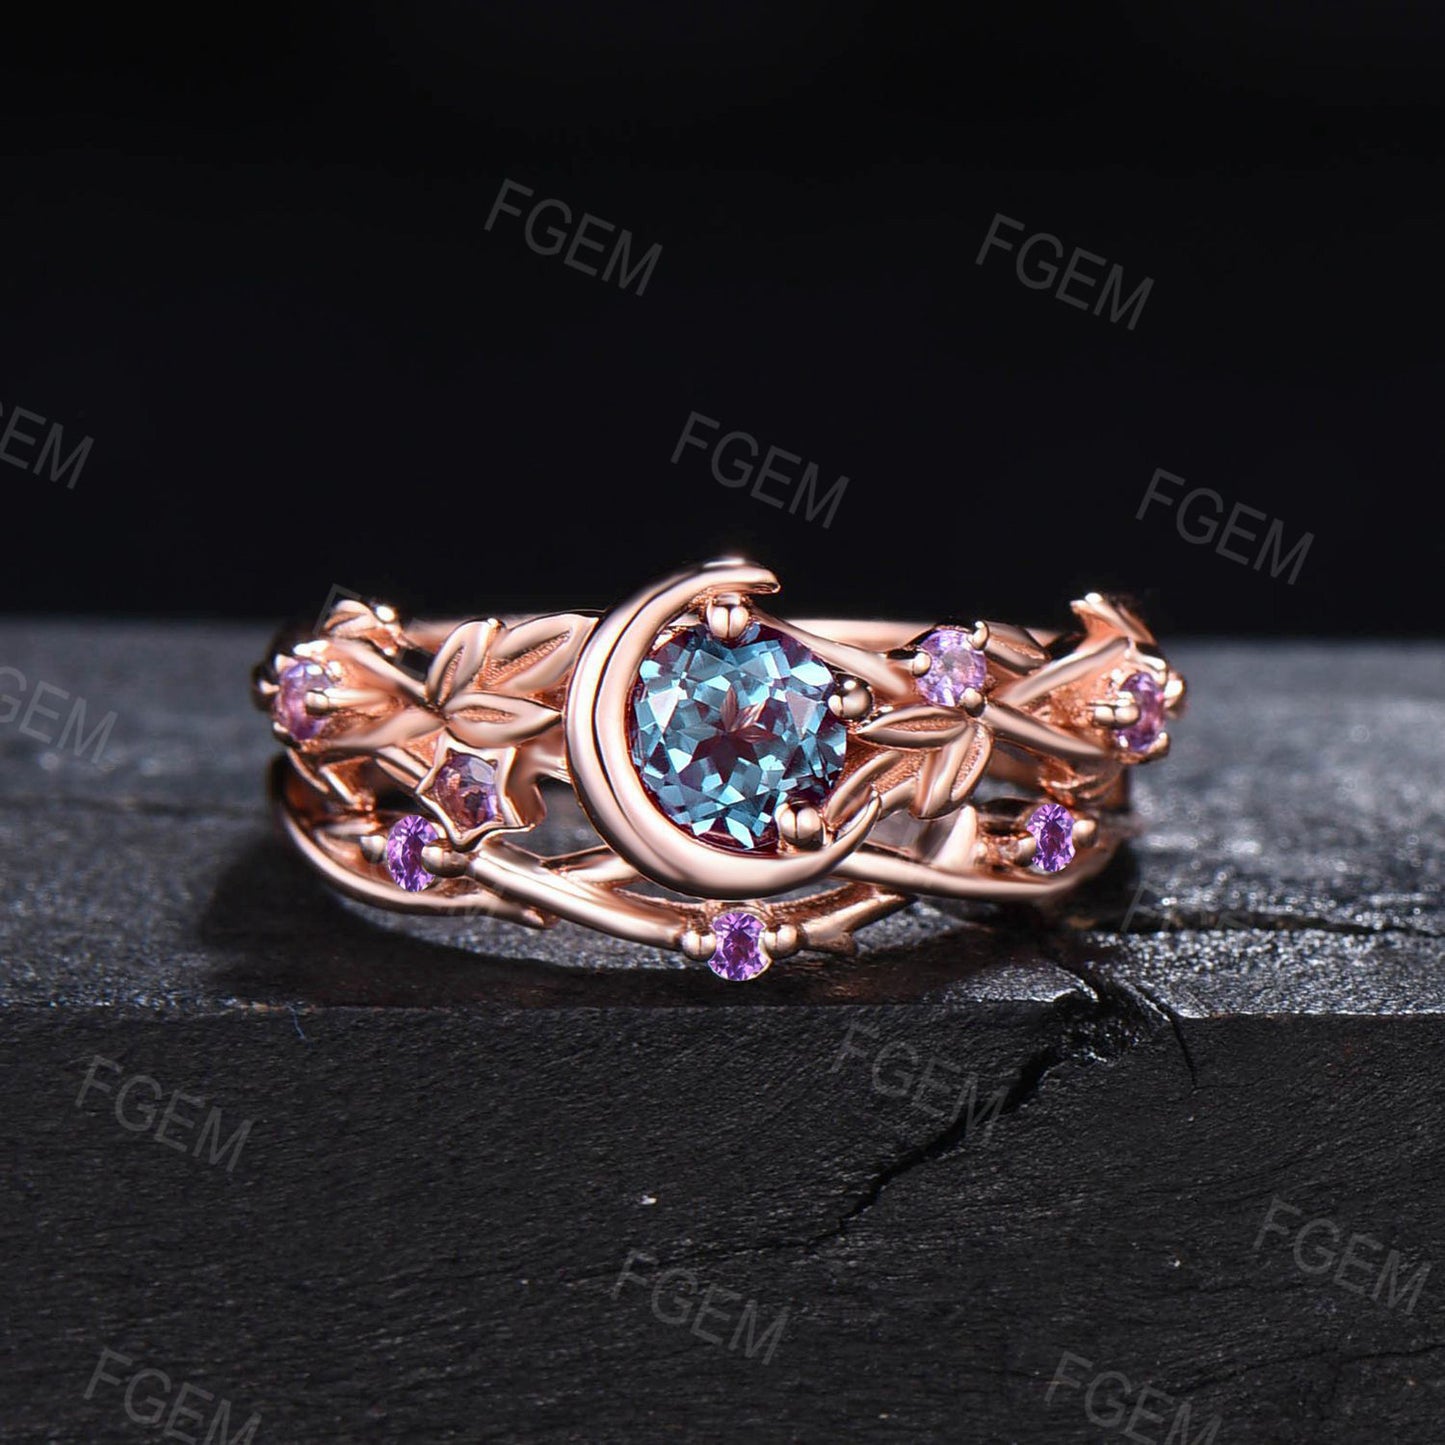 5mm Round Color-Change Alexandrite Ring Set Crescent Moon Alexandrite Bridal Set Nature Style Twig Leaf Amethyst Ring June Birthstone Gifts